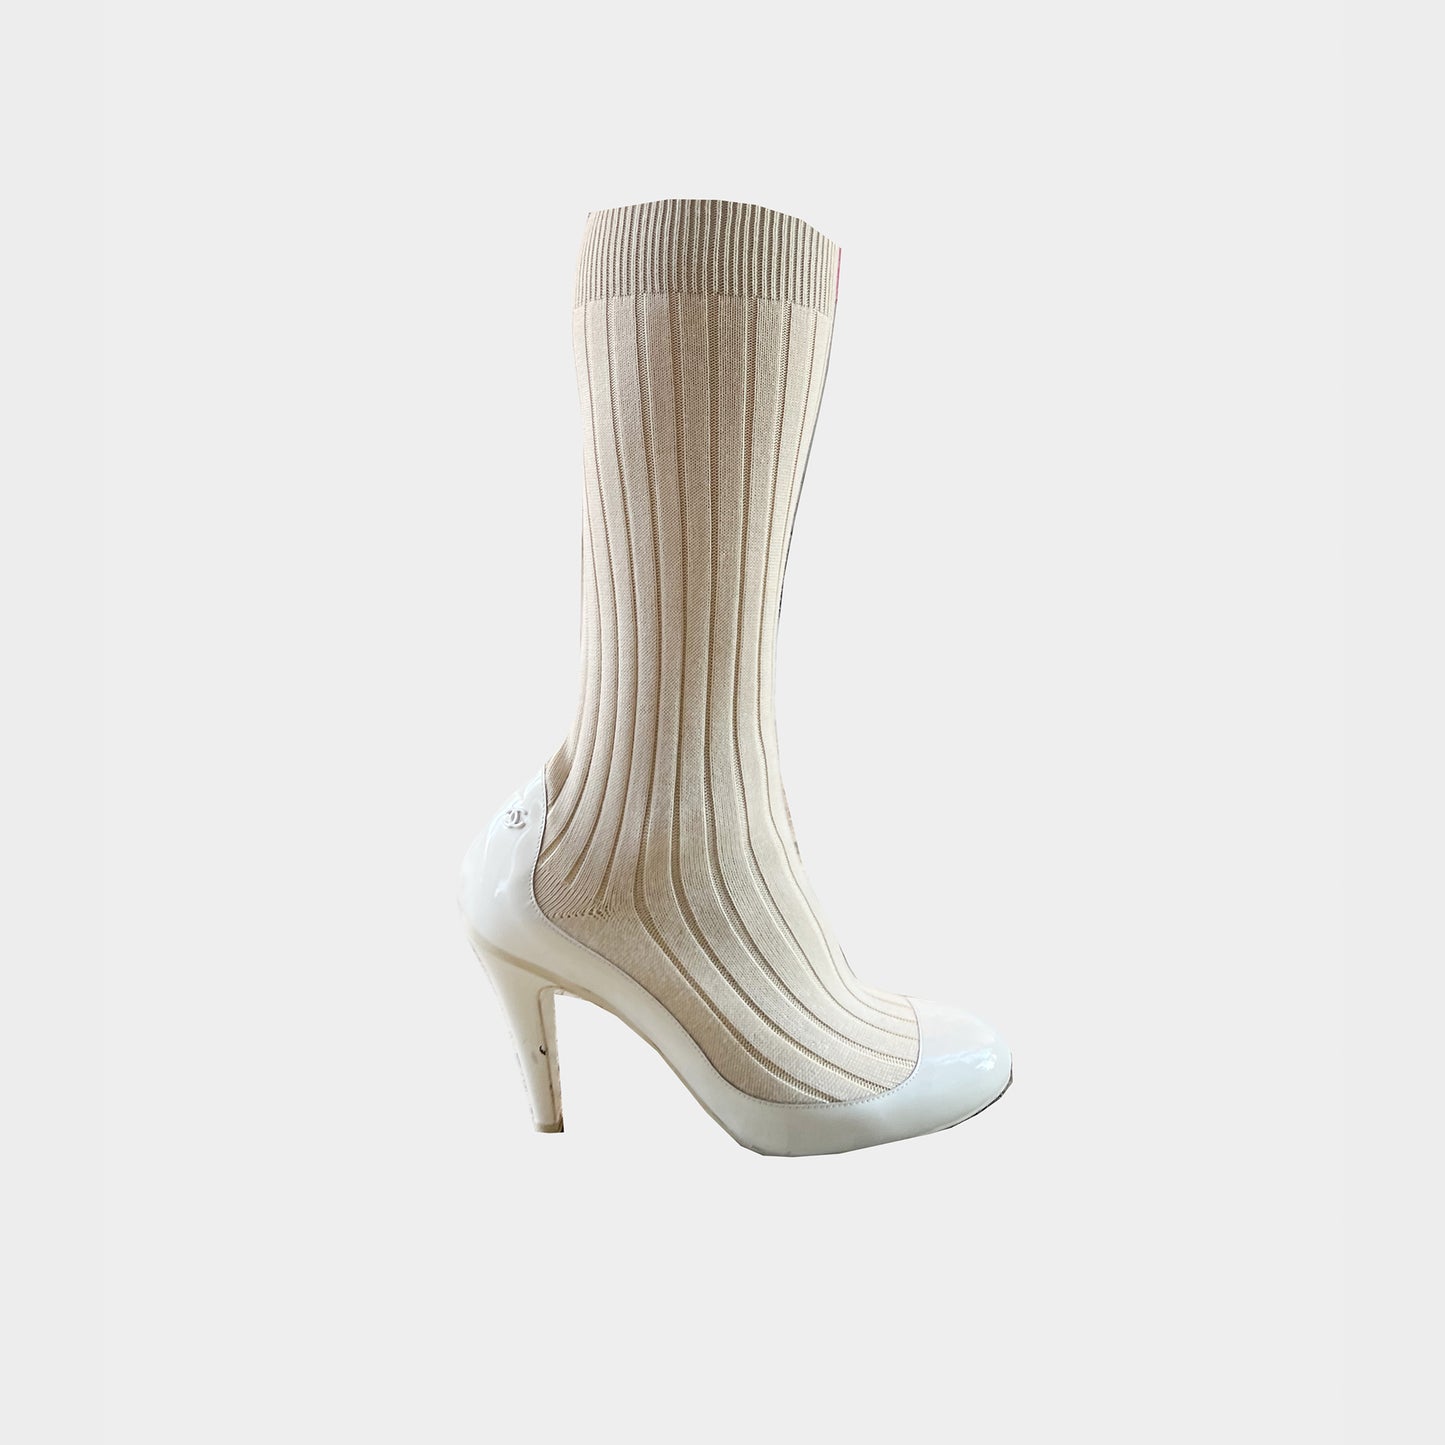 CHANEL 1990S KNIT CREAM ANKLE BOOTS